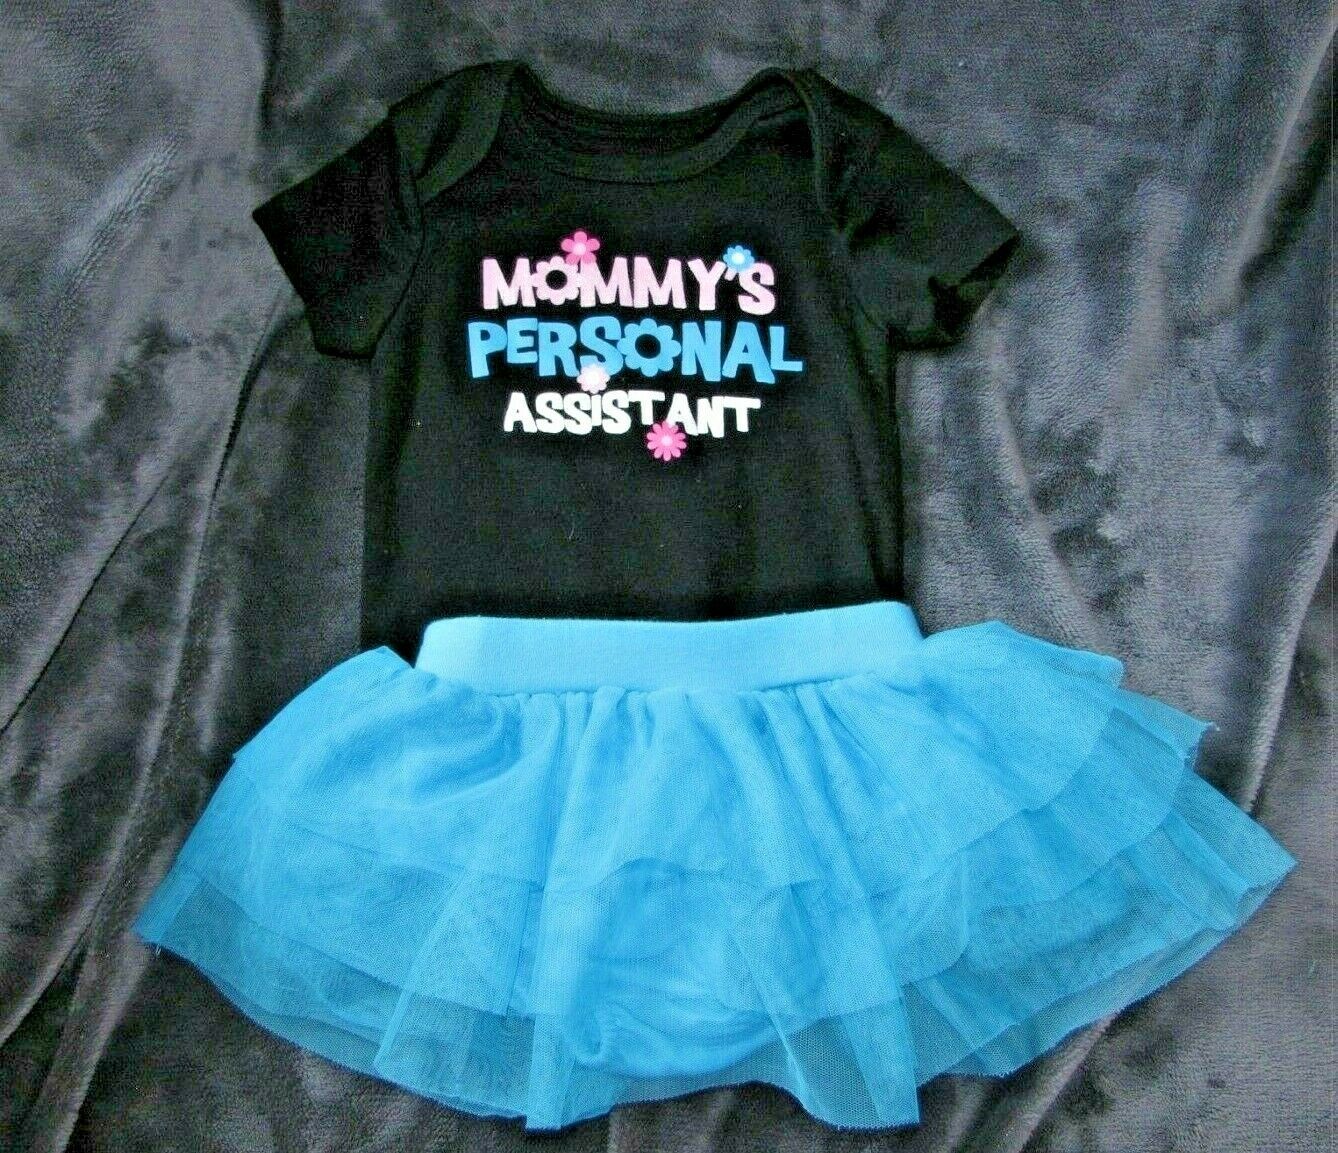 FADED GLORY MOMMYS MOMMY'S PERSONAL ASSISTANT BODYSUIT & BLUE TUTU GIRL 3-6 - $13.85